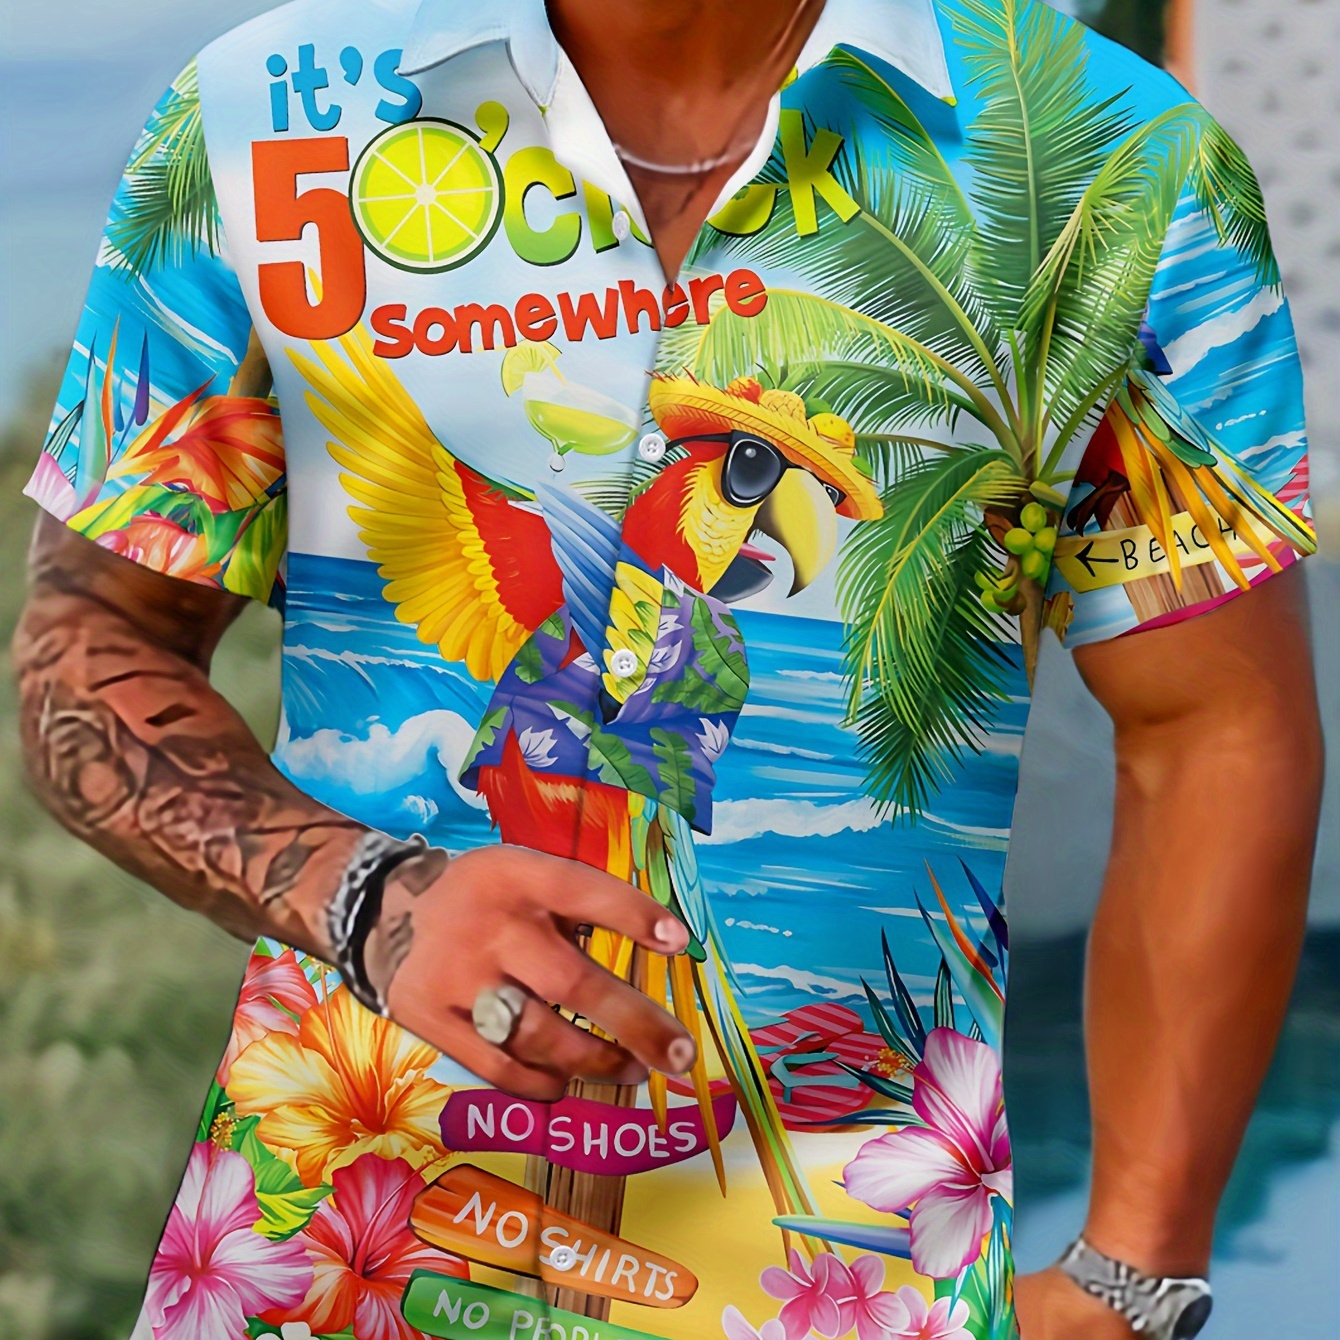 

Men's Cartoon Style Beach Themed Parrot Pattern And Floral Print Lapel Shirt With Short Sleeve And Button Down Placket, Cool And Novel Tops For Summer Leisurewear And Beach Vacation